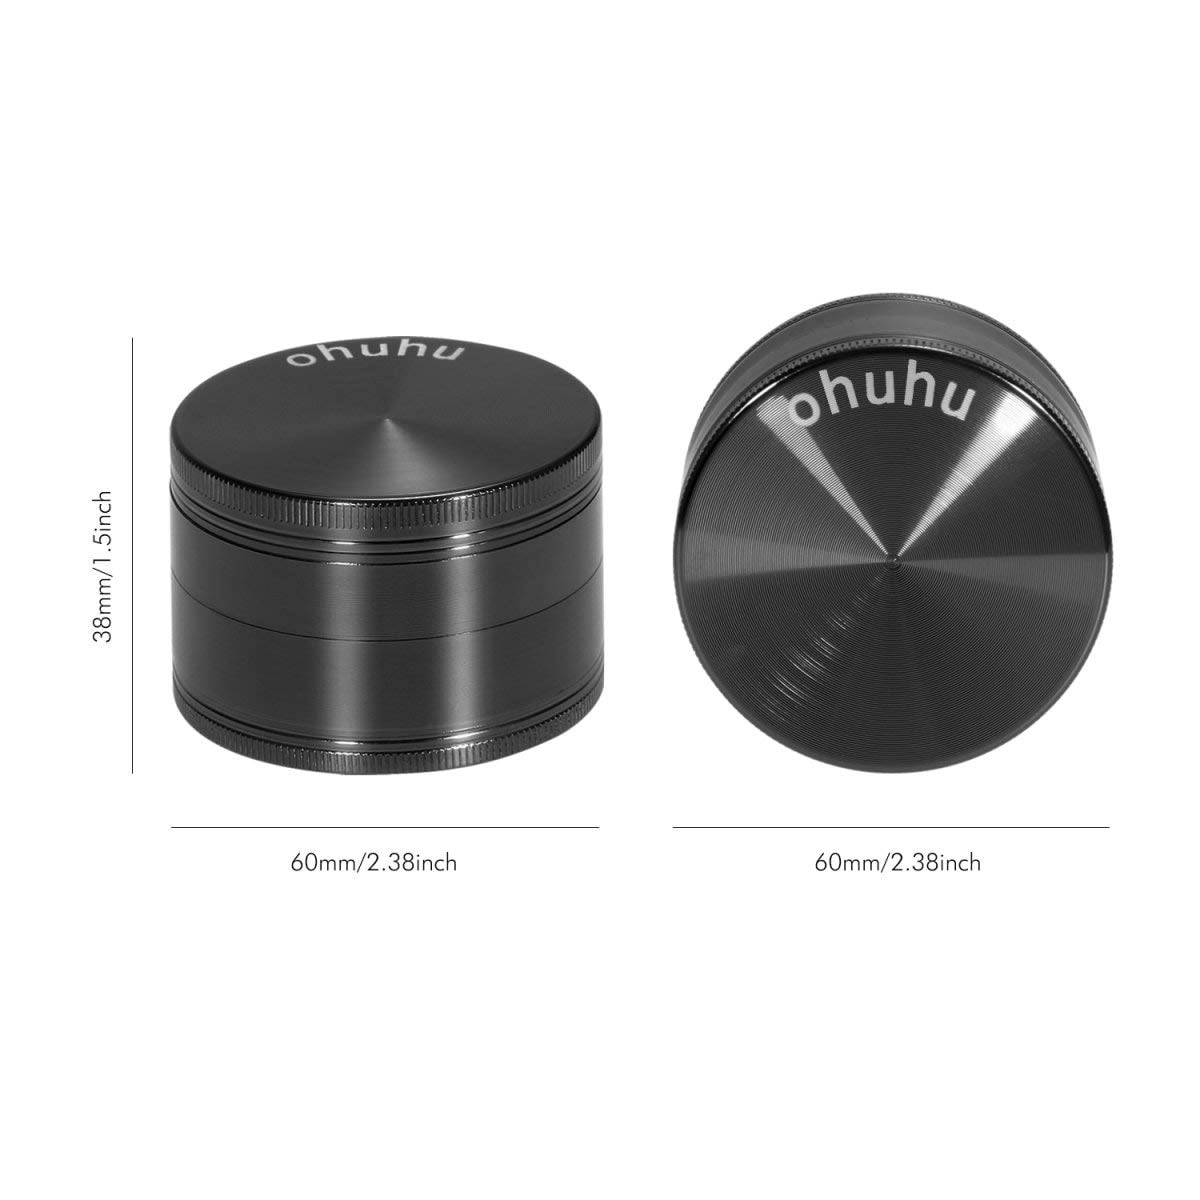 Ohuhu 4 Piece 2.38" Spice Plant Tobacco Grinders with 3 Chambers Herb Grinder 